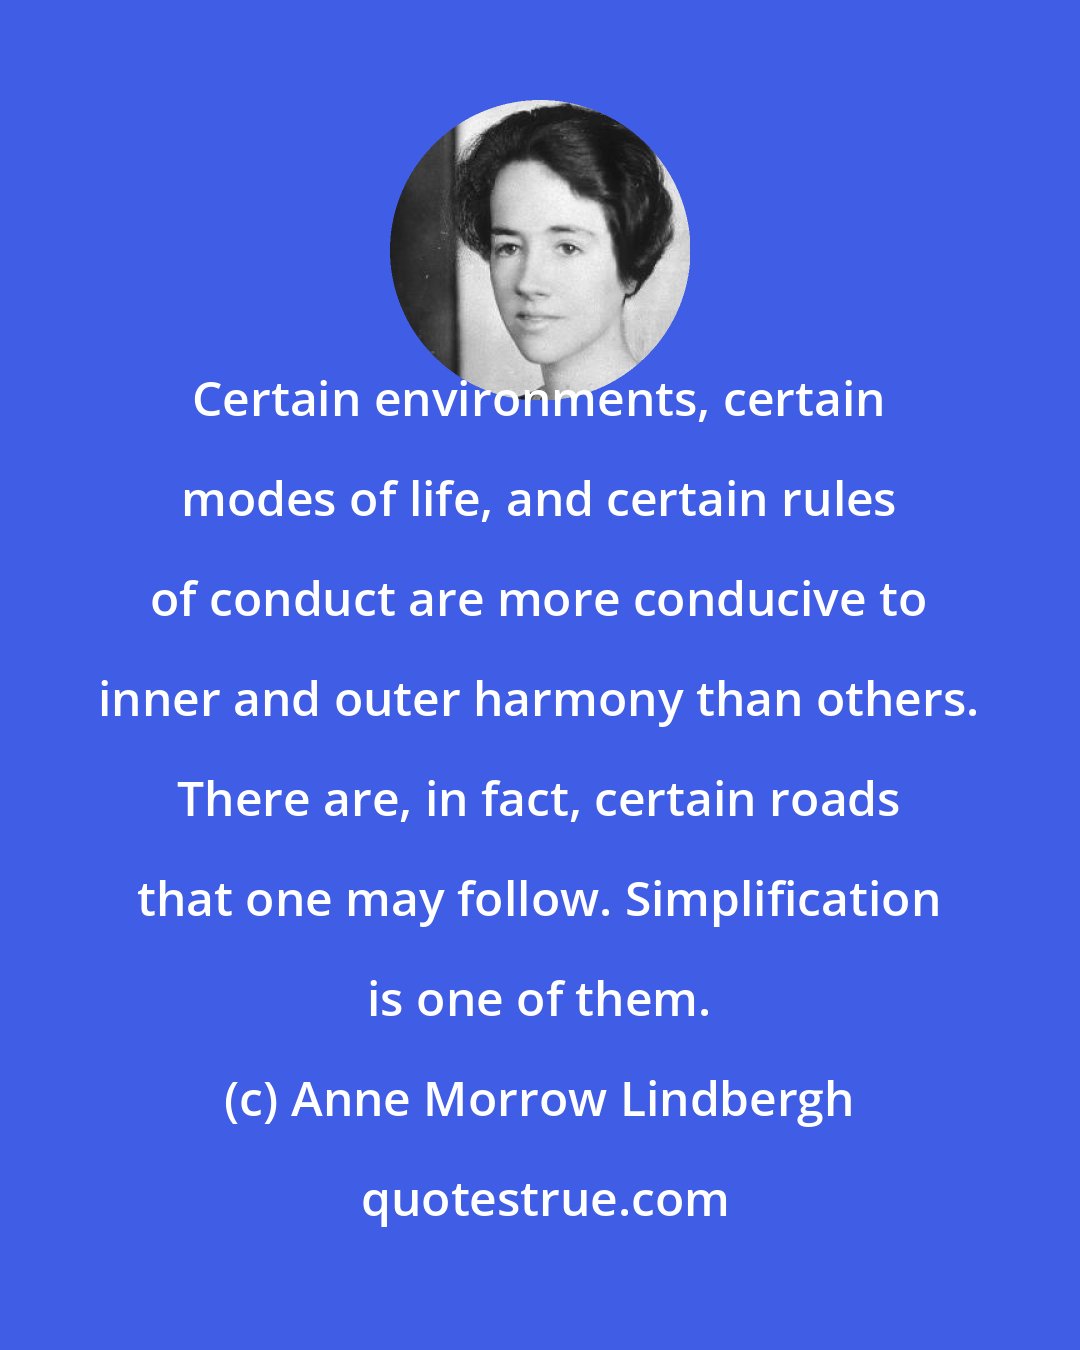 Anne Morrow Lindbergh: Certain environments, certain modes of life, and certain rules of conduct are more conducive to inner and outer harmony than others. There are, in fact, certain roads that one may follow. Simplification is one of them.